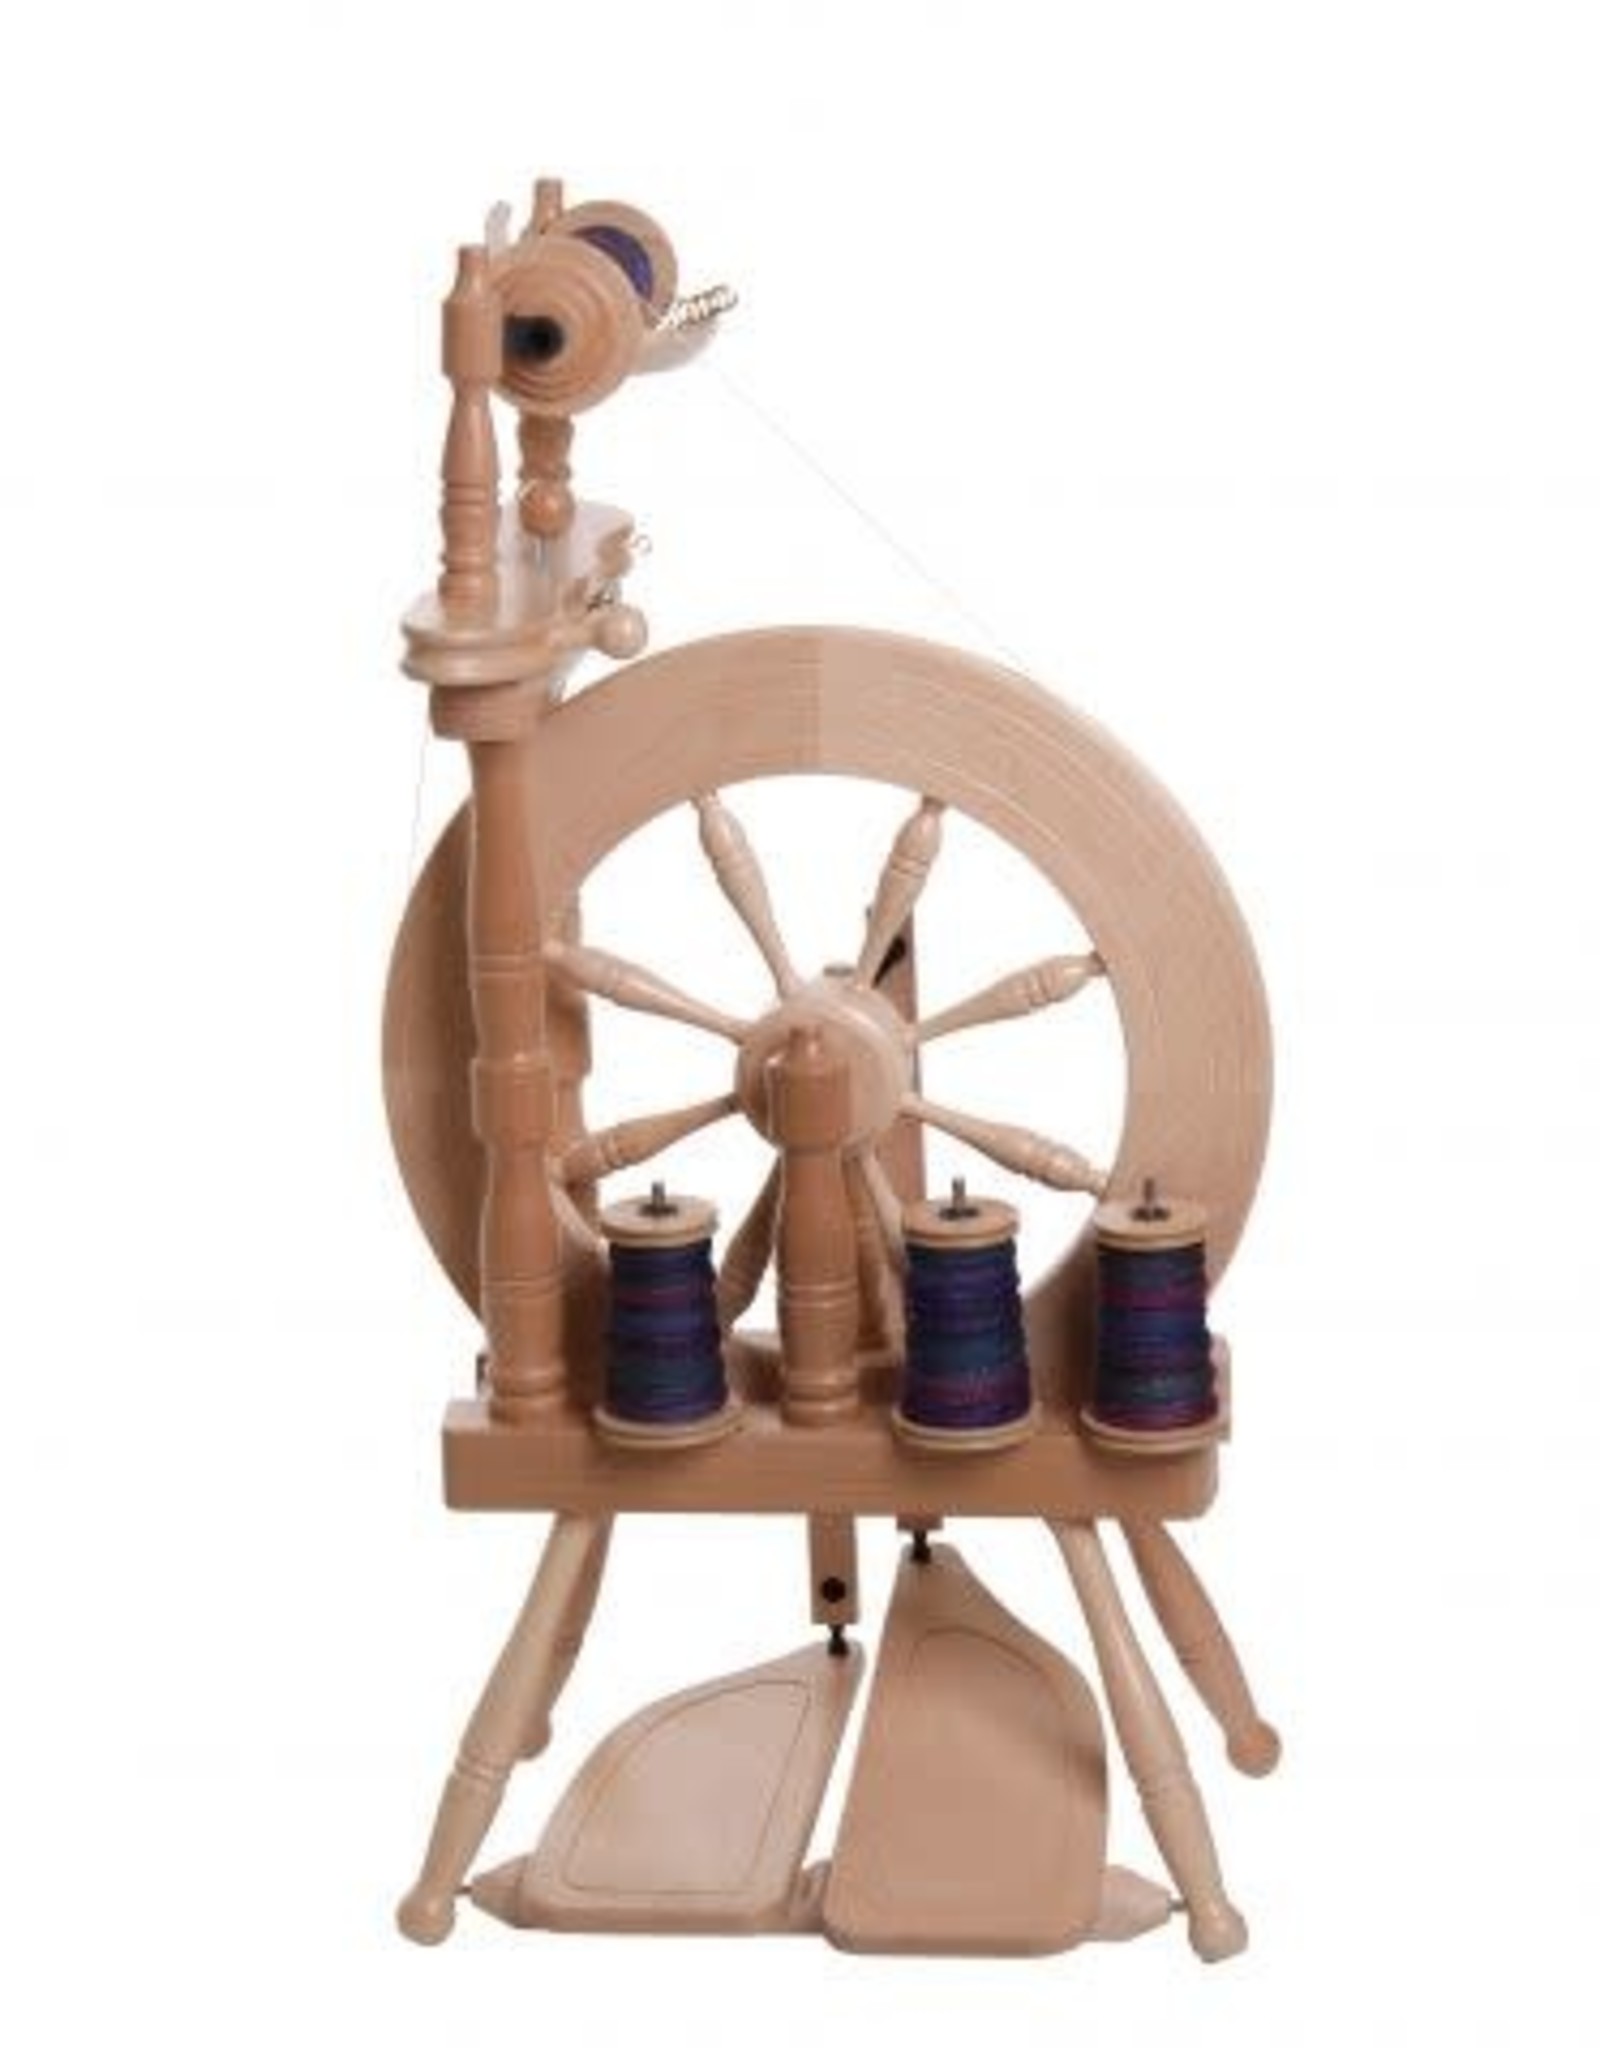 Ashford Traveller 2 Spinning Wheel, Double Drive, Scotch Tension (Single Drive) Lacquered